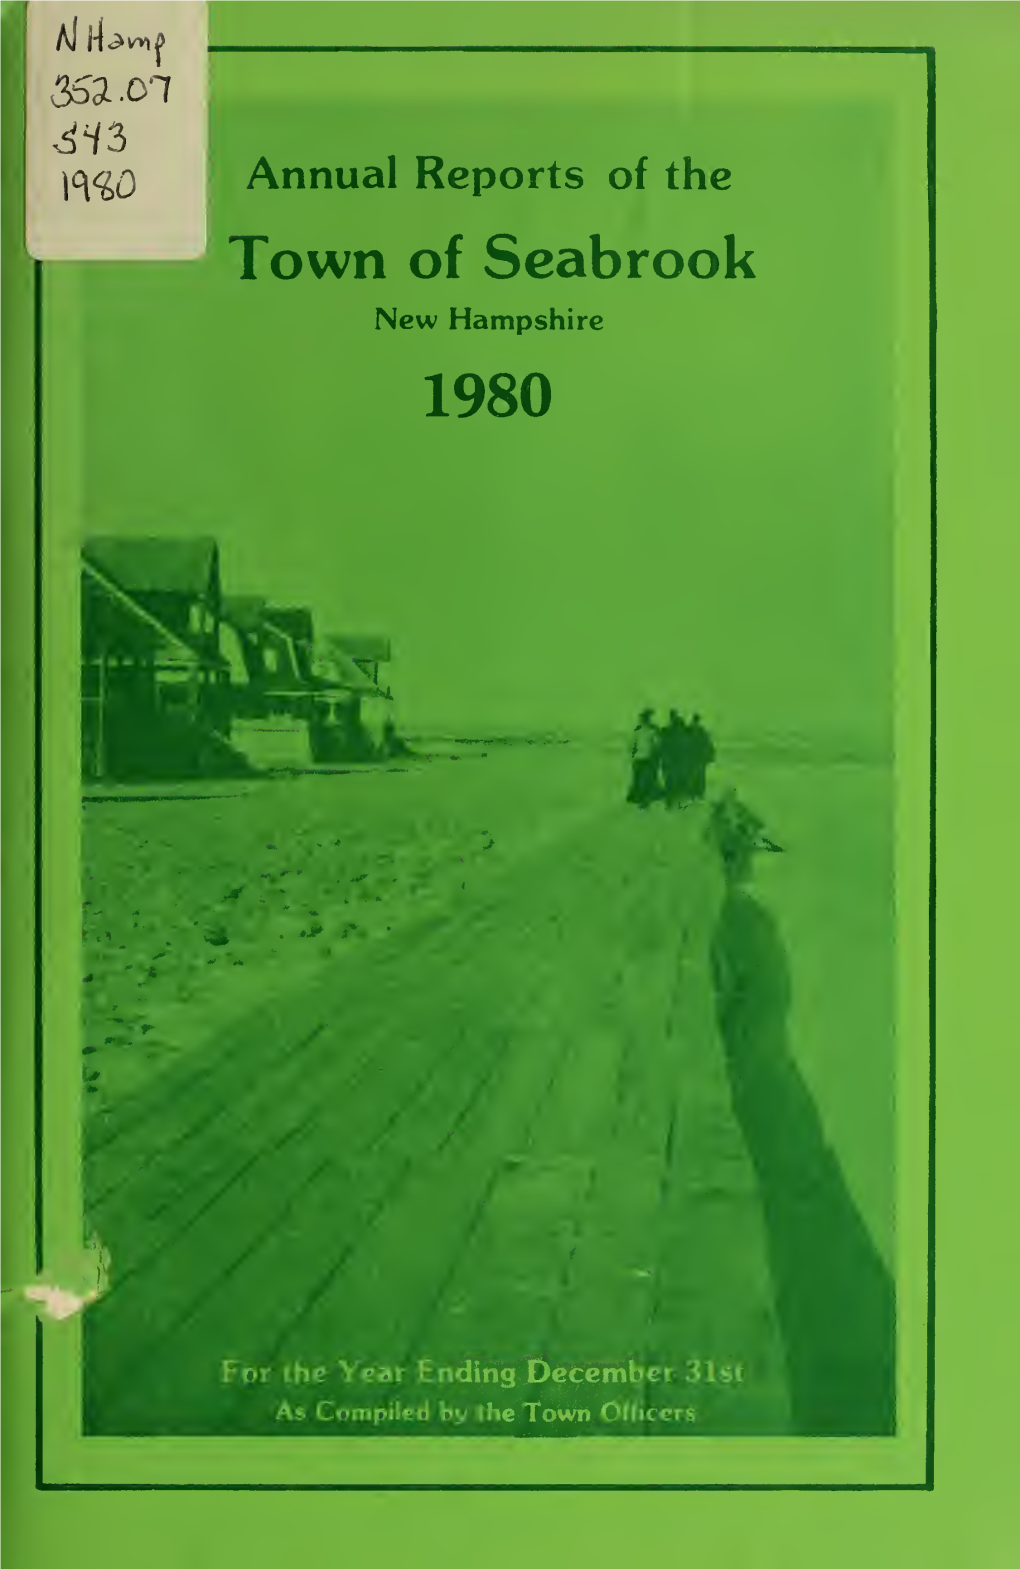 Annual Reports of the Town of Seabrook, New Hampshire for the Year